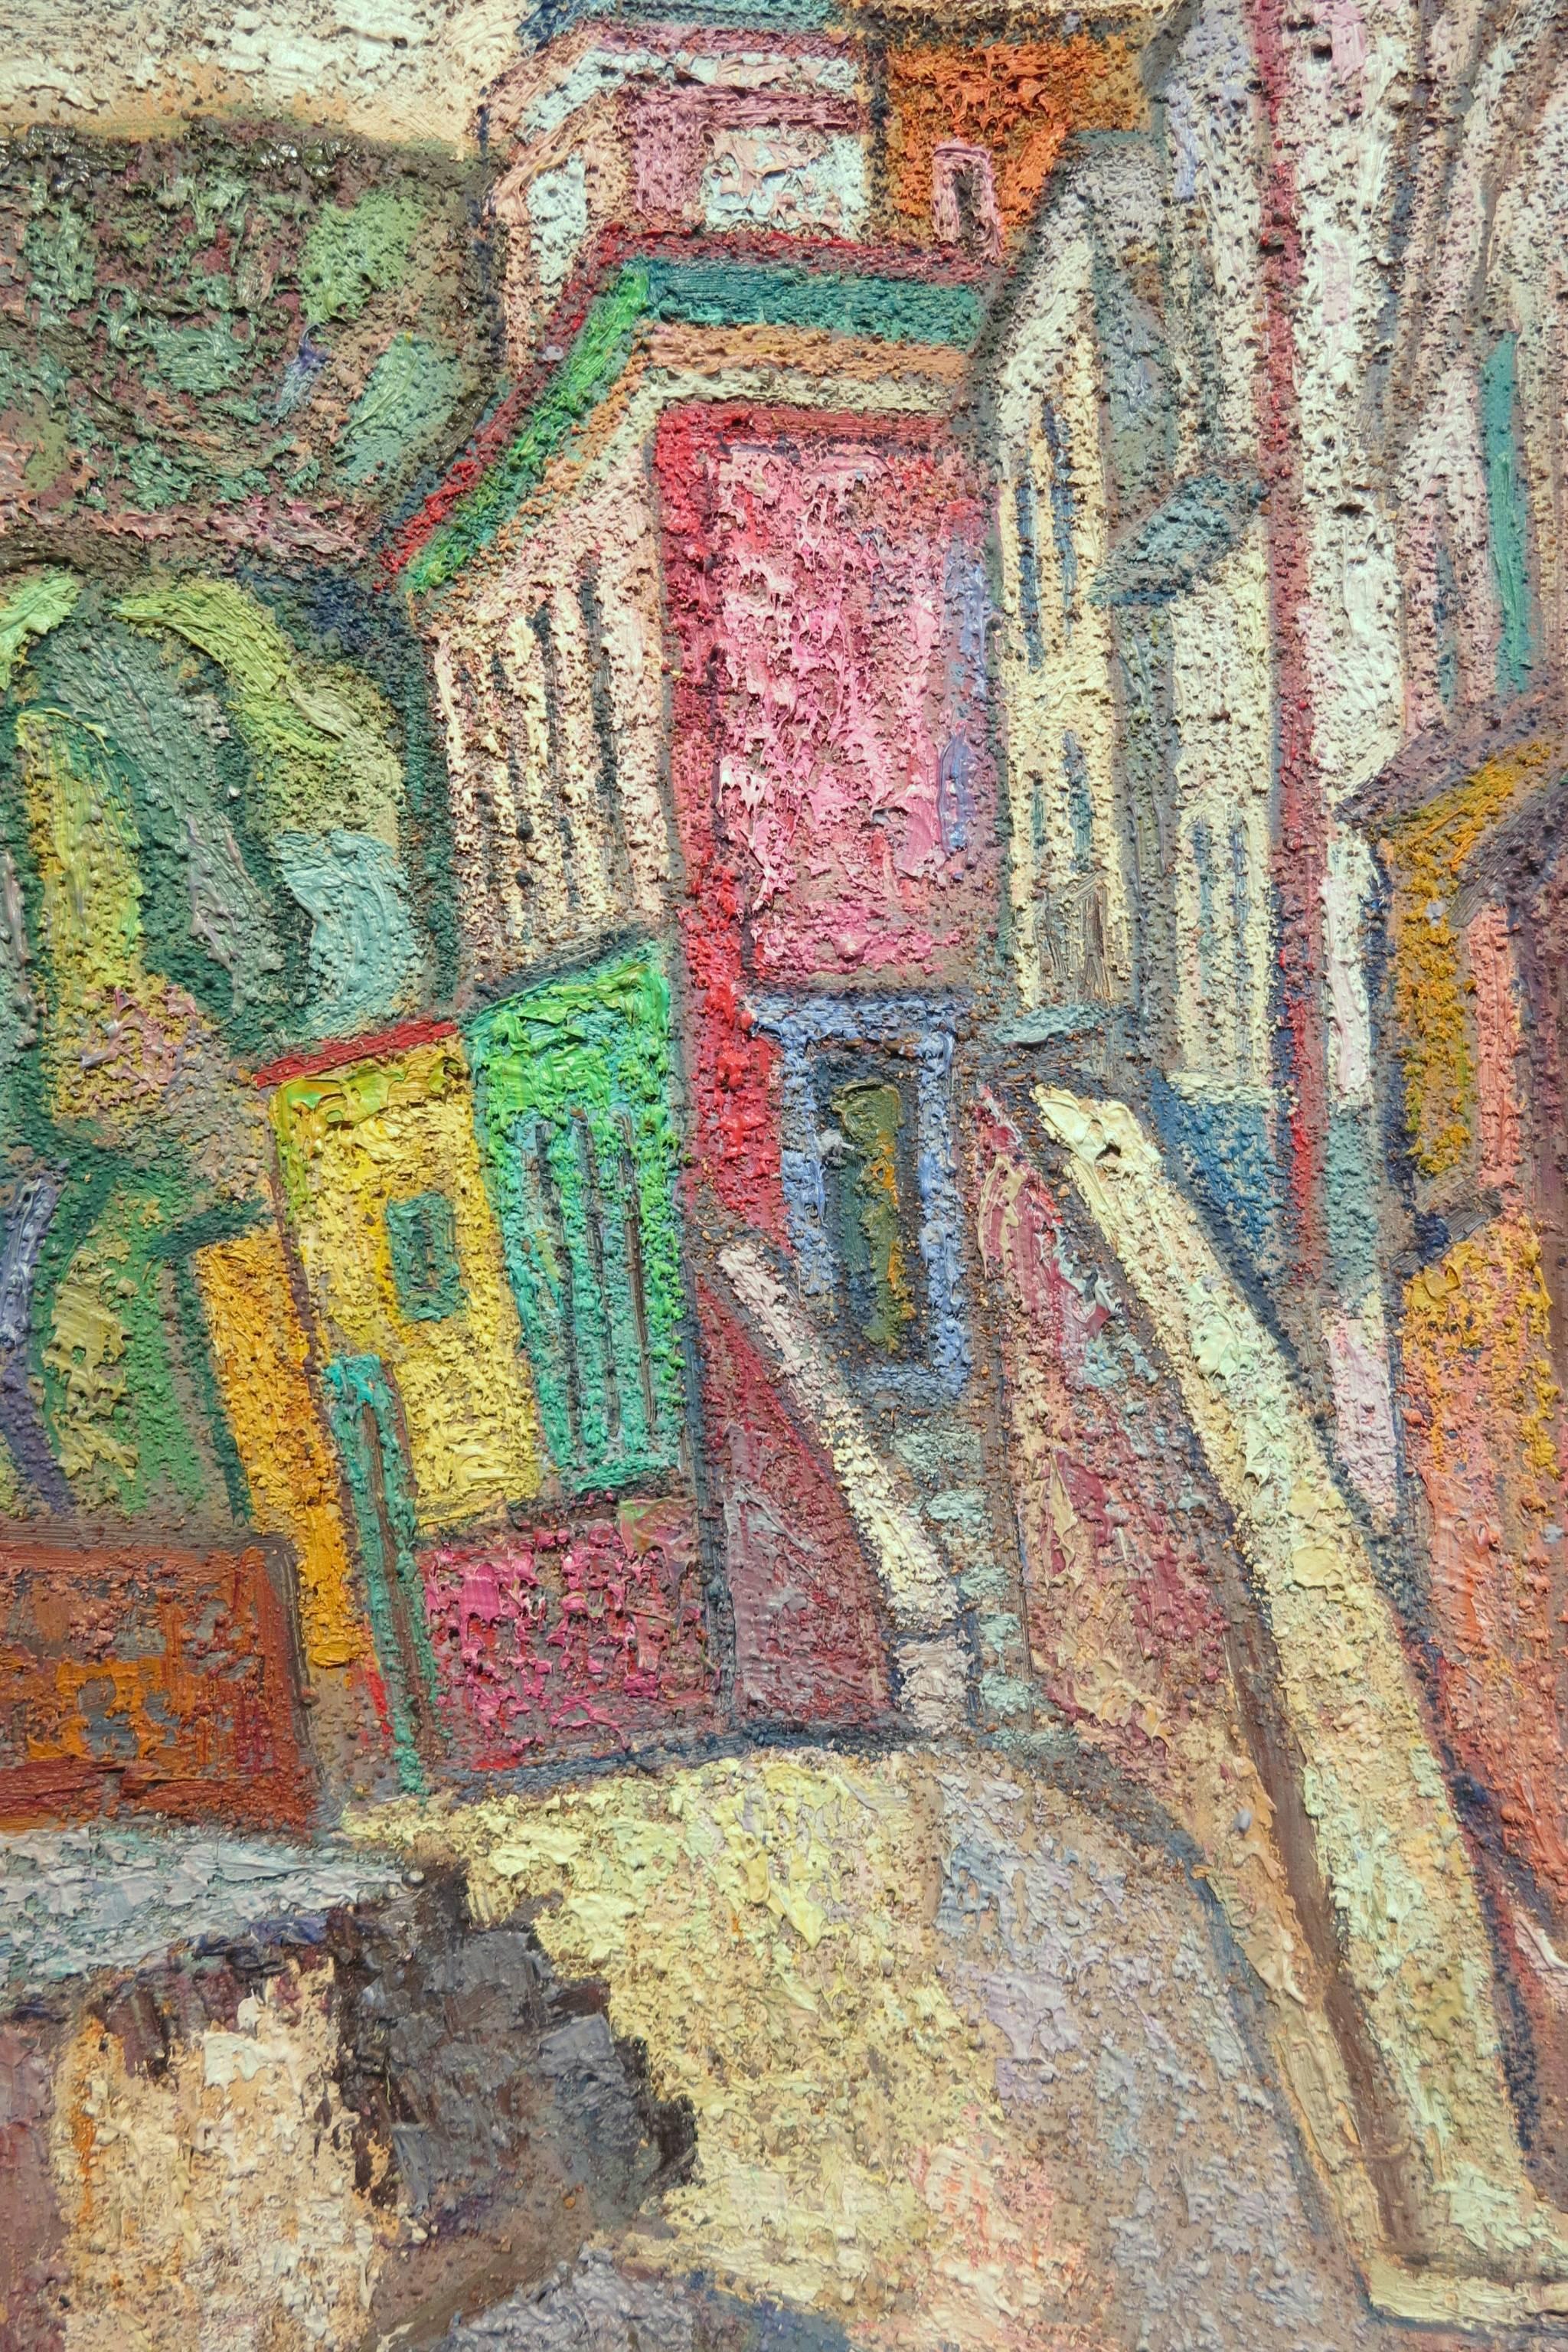 Beautiful architectural oil painting by American artist Samuel Reindorf (1914-1988). Oil and sand on canvas measures 22 x 30 inches; 23 x 31 inches framed. Excellent condition with no damage or restoration. Signed and dated lower right. Titled and